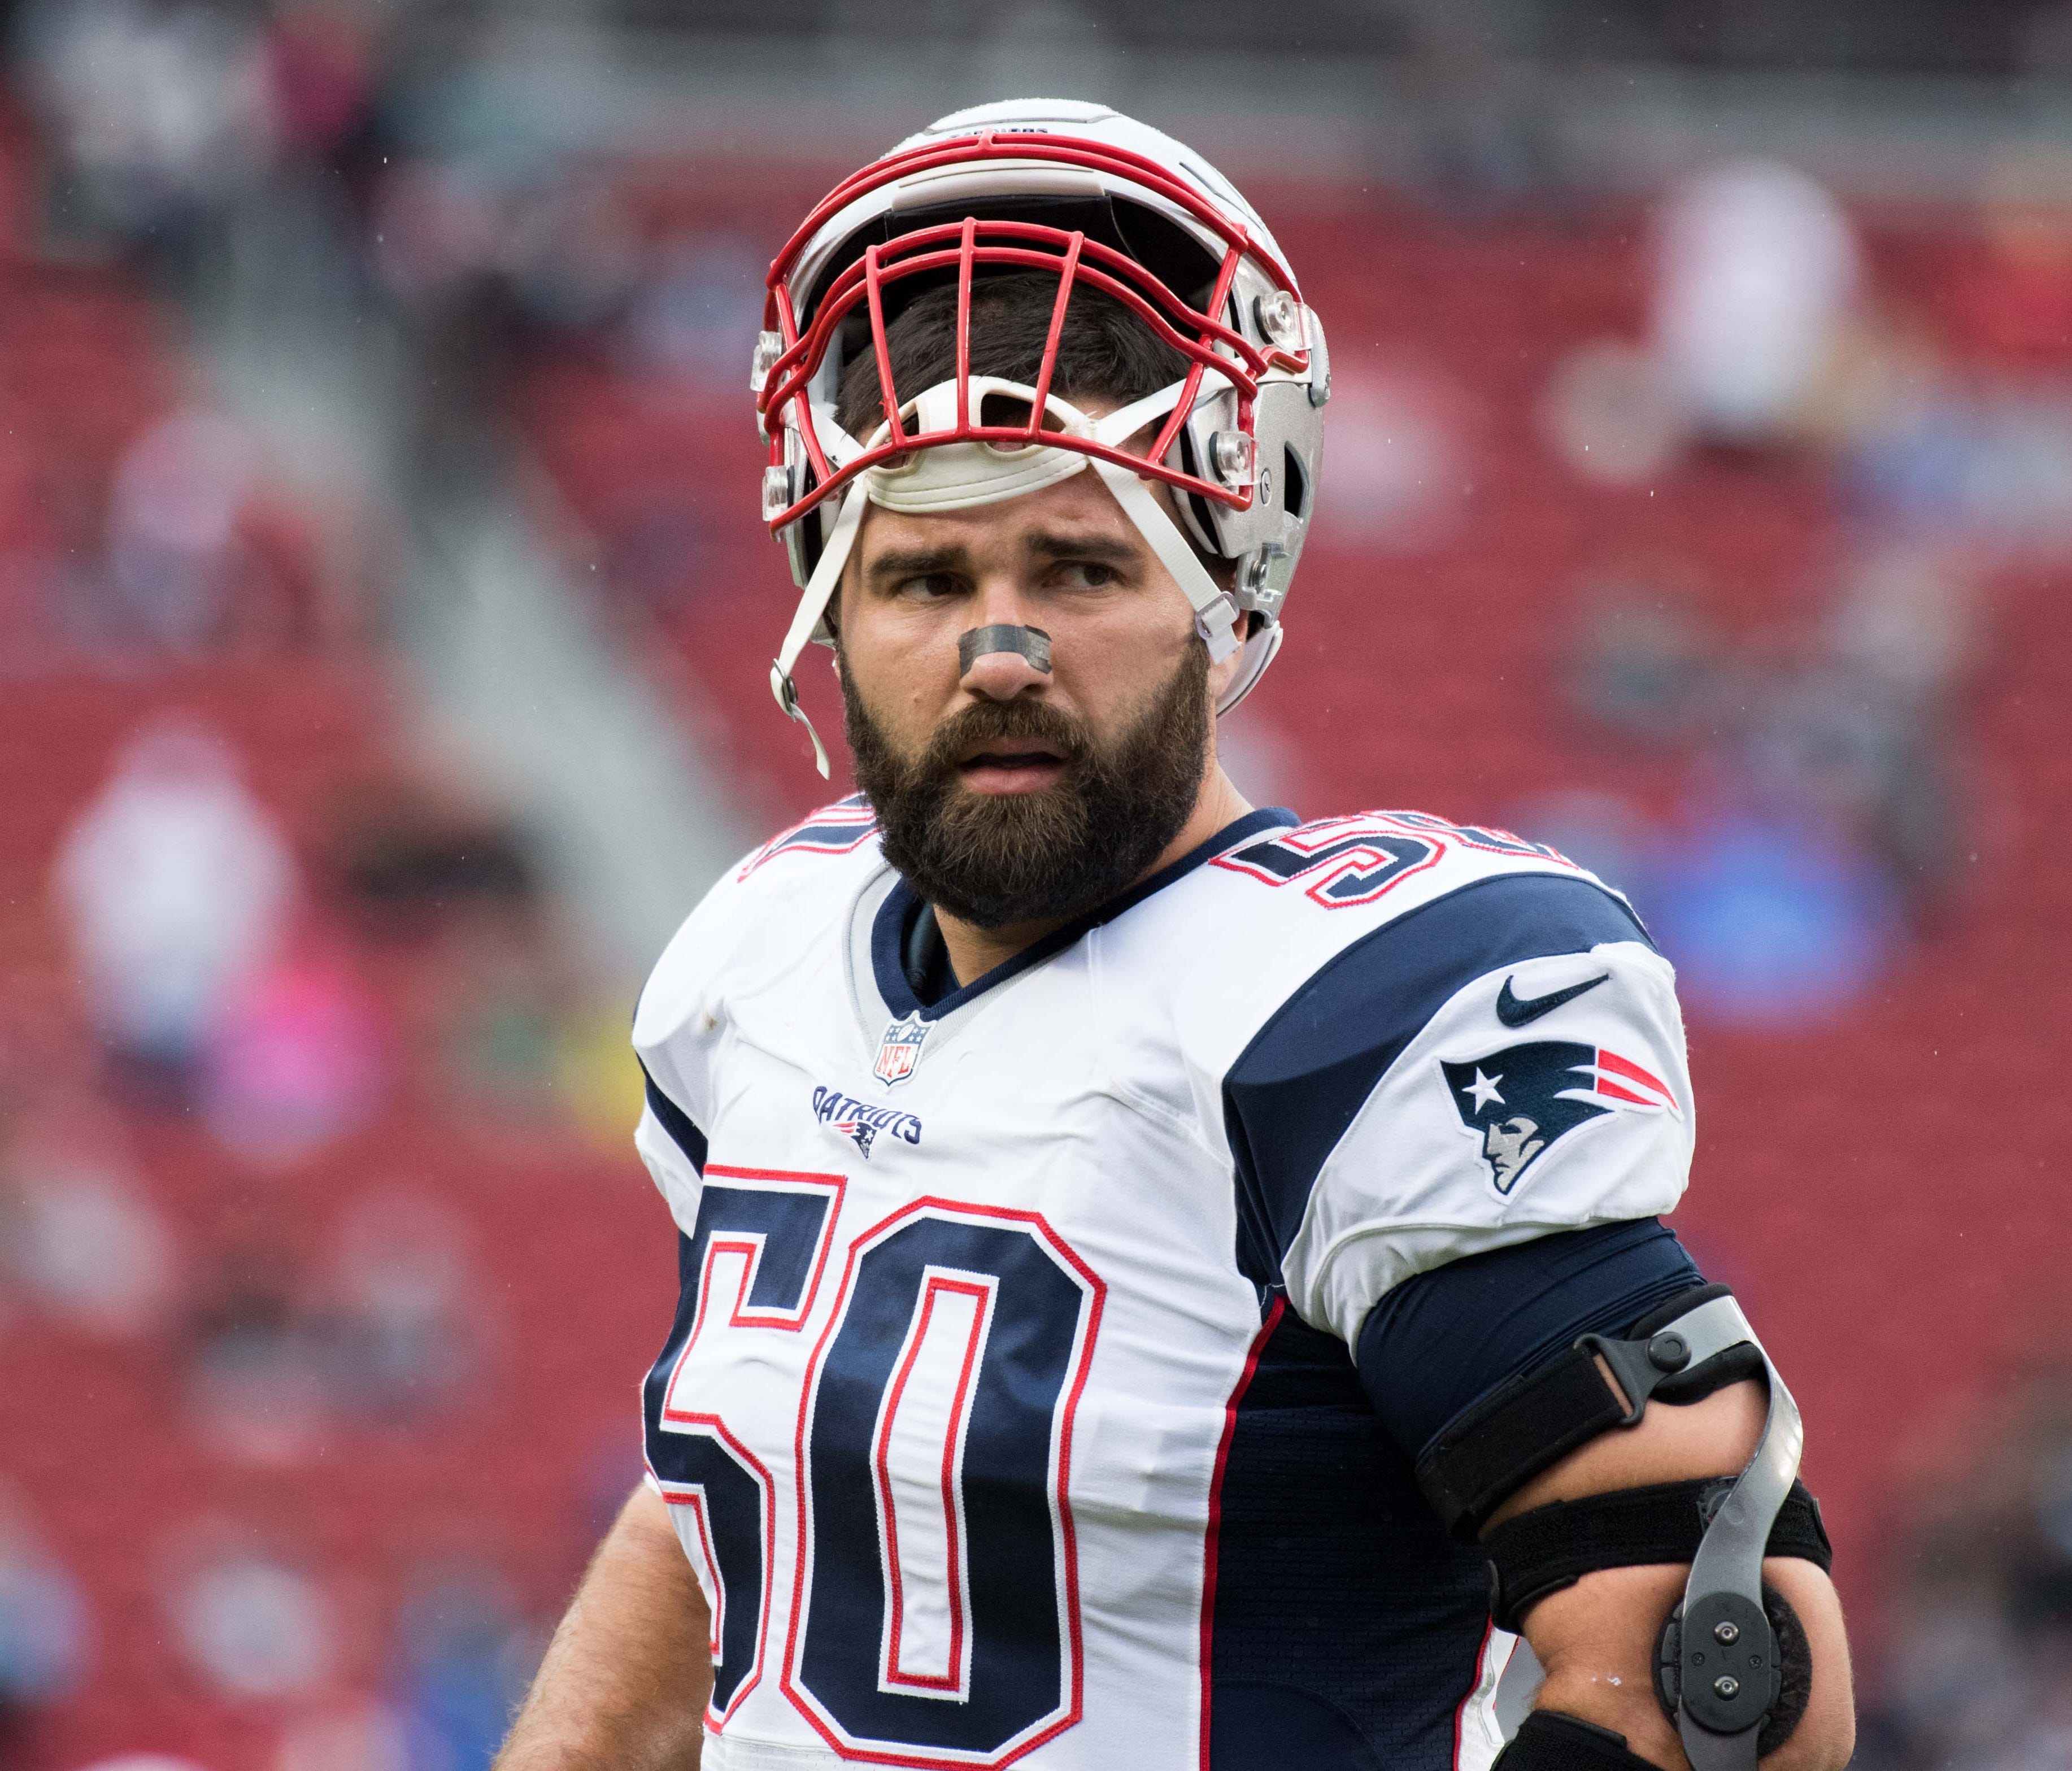 New England Patriots defensive end Rob Ninkovich (50) before the game against the San Francisco 49ers at Levi's Stadium.